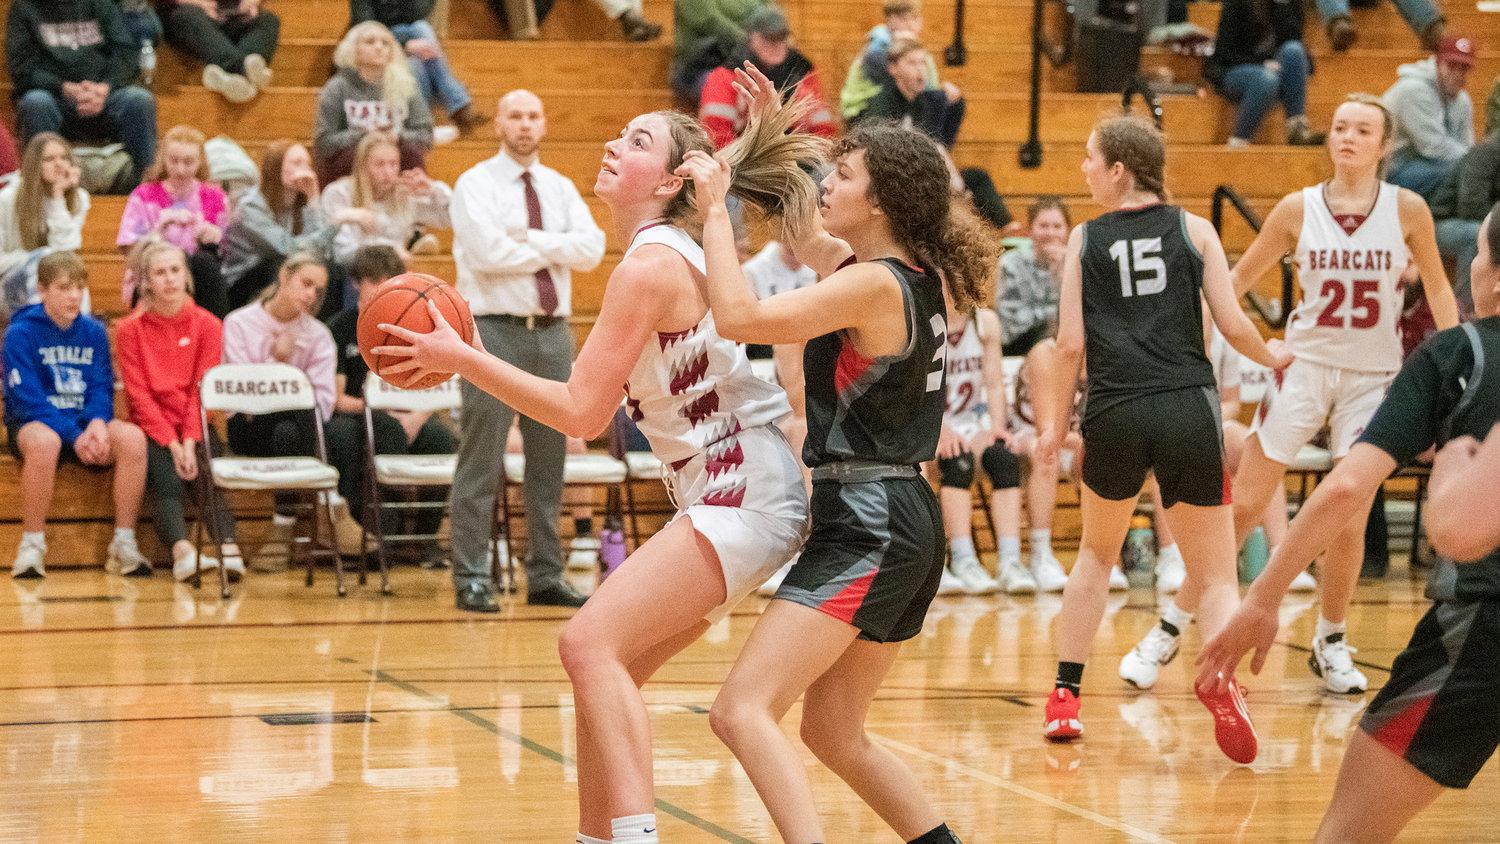 Bearcat senior Morgan Rogerson (21) looks to score Tuesday night during a game against R.A. Long at W.F. West High Shool in Chehalis.